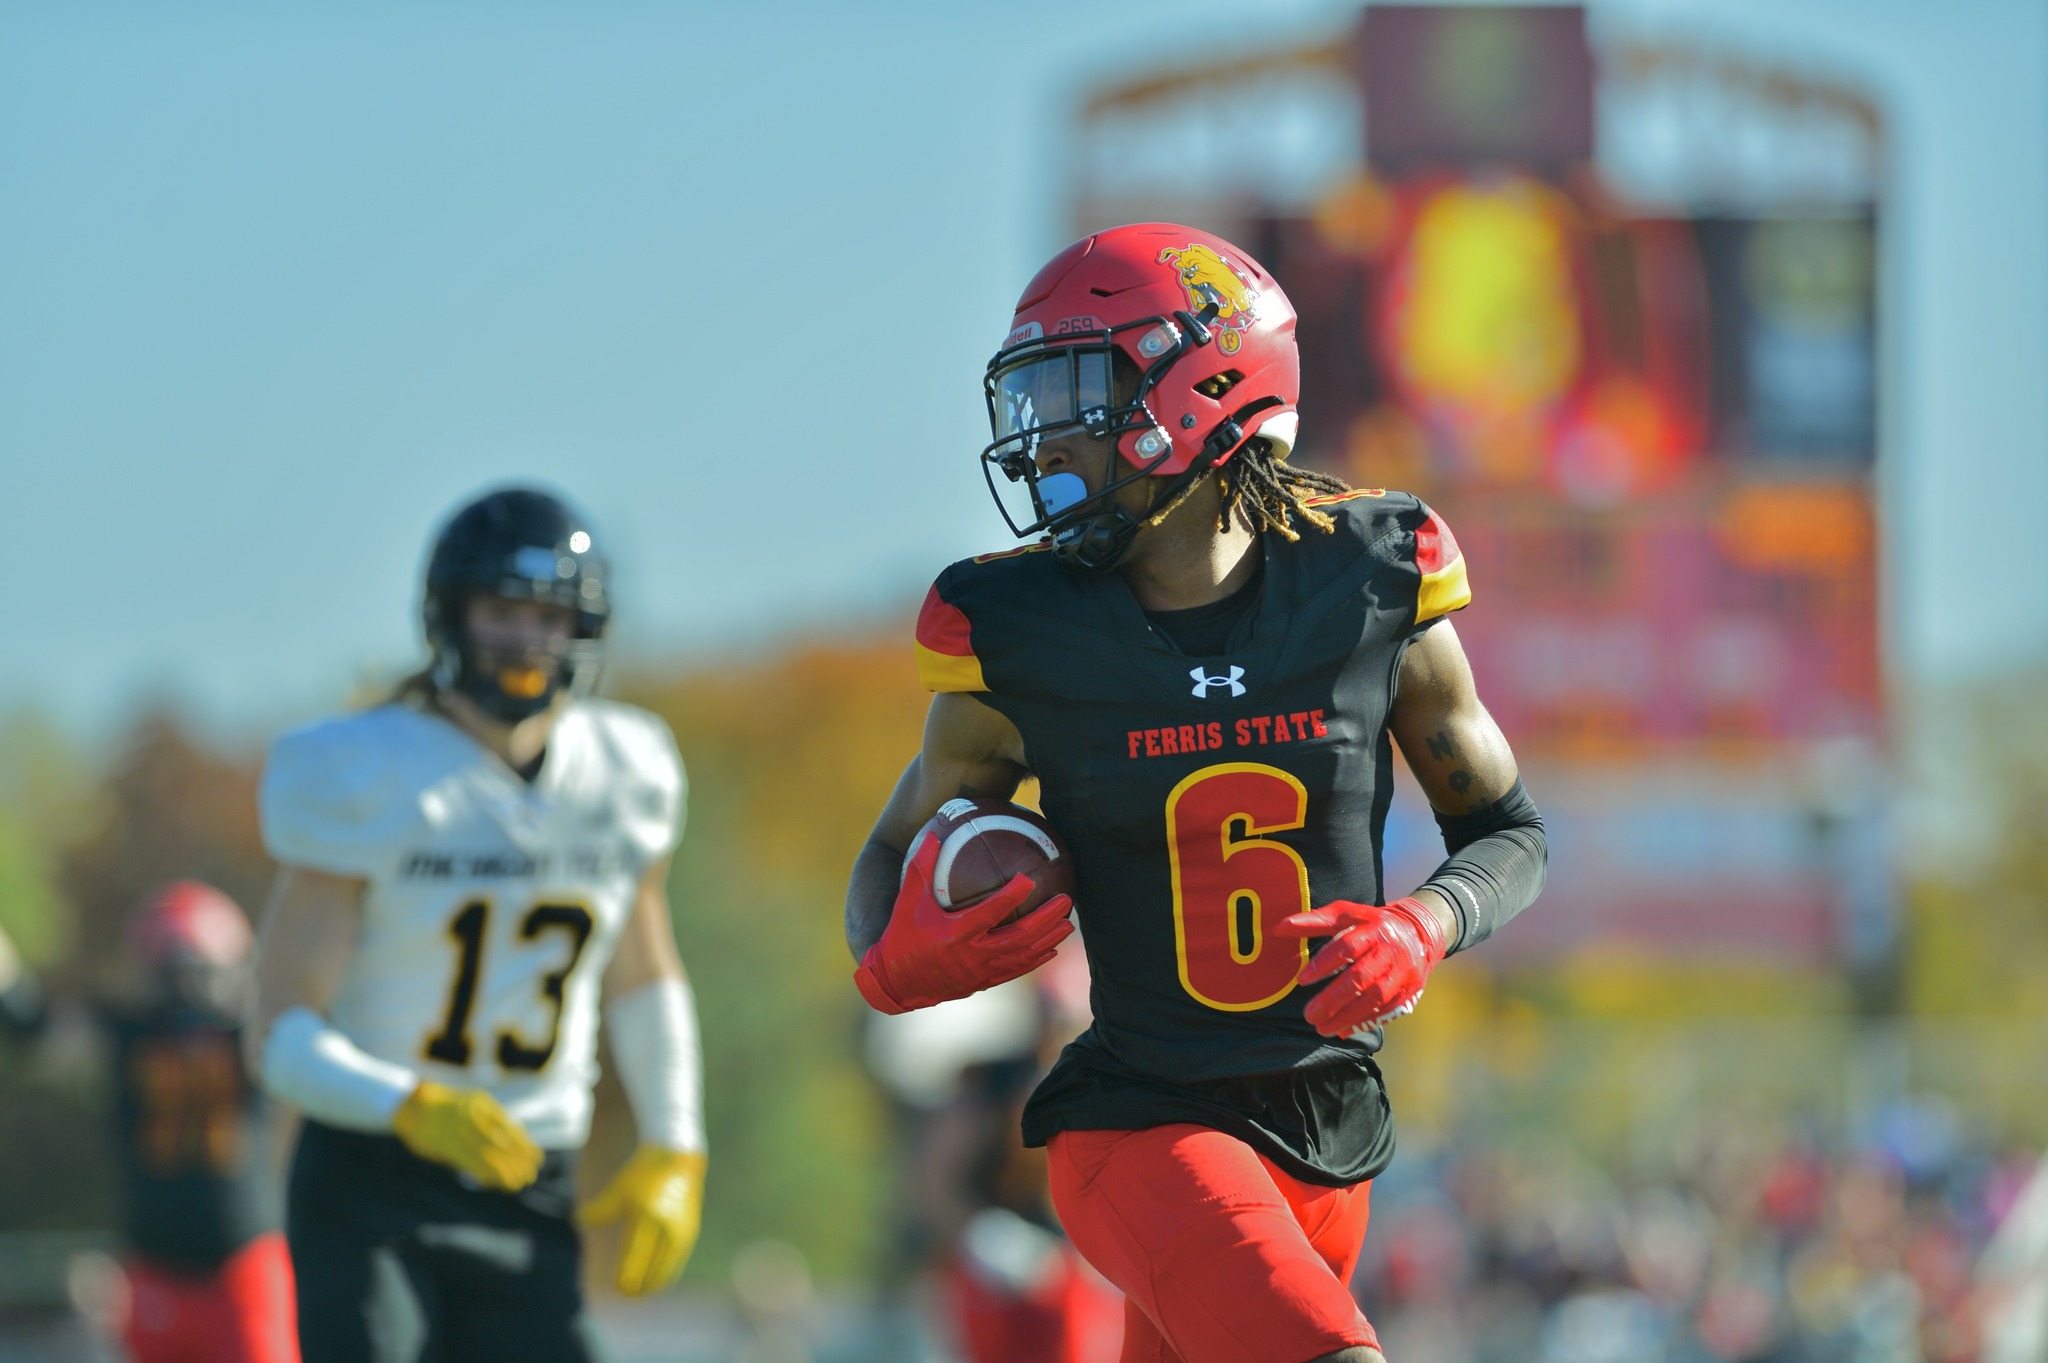 Ferris State Notches 10th Consecutive Win Over Michigan Tech In Tightly-Contested Contest